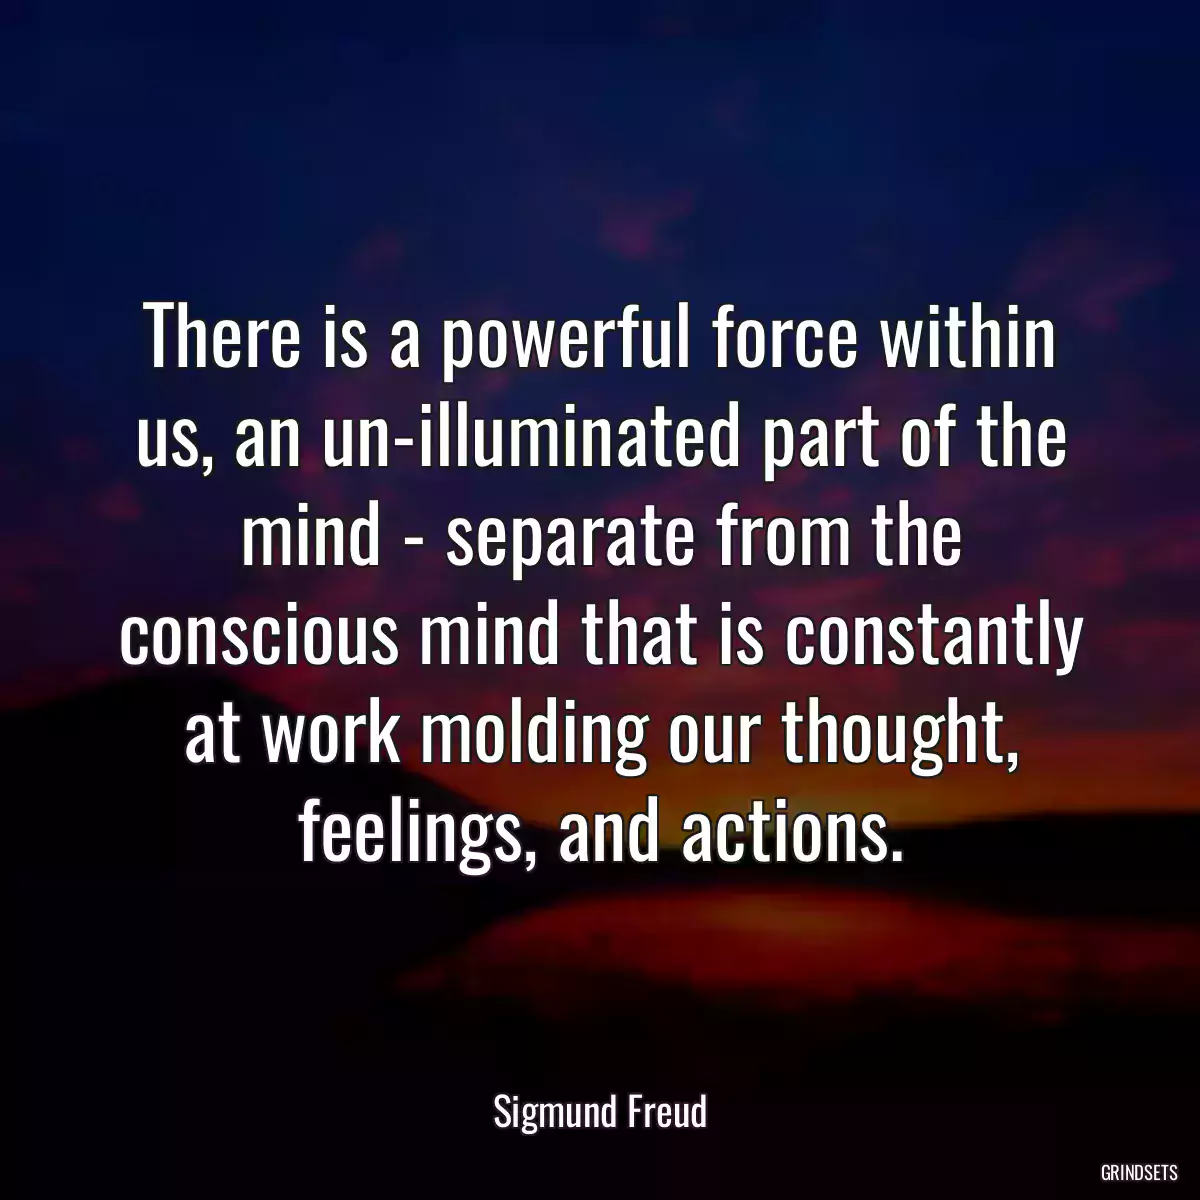 There is a powerful force within us, an un-illuminated part of the mind - separate from the conscious mind that is constantly at work molding our thought, feelings, and actions.